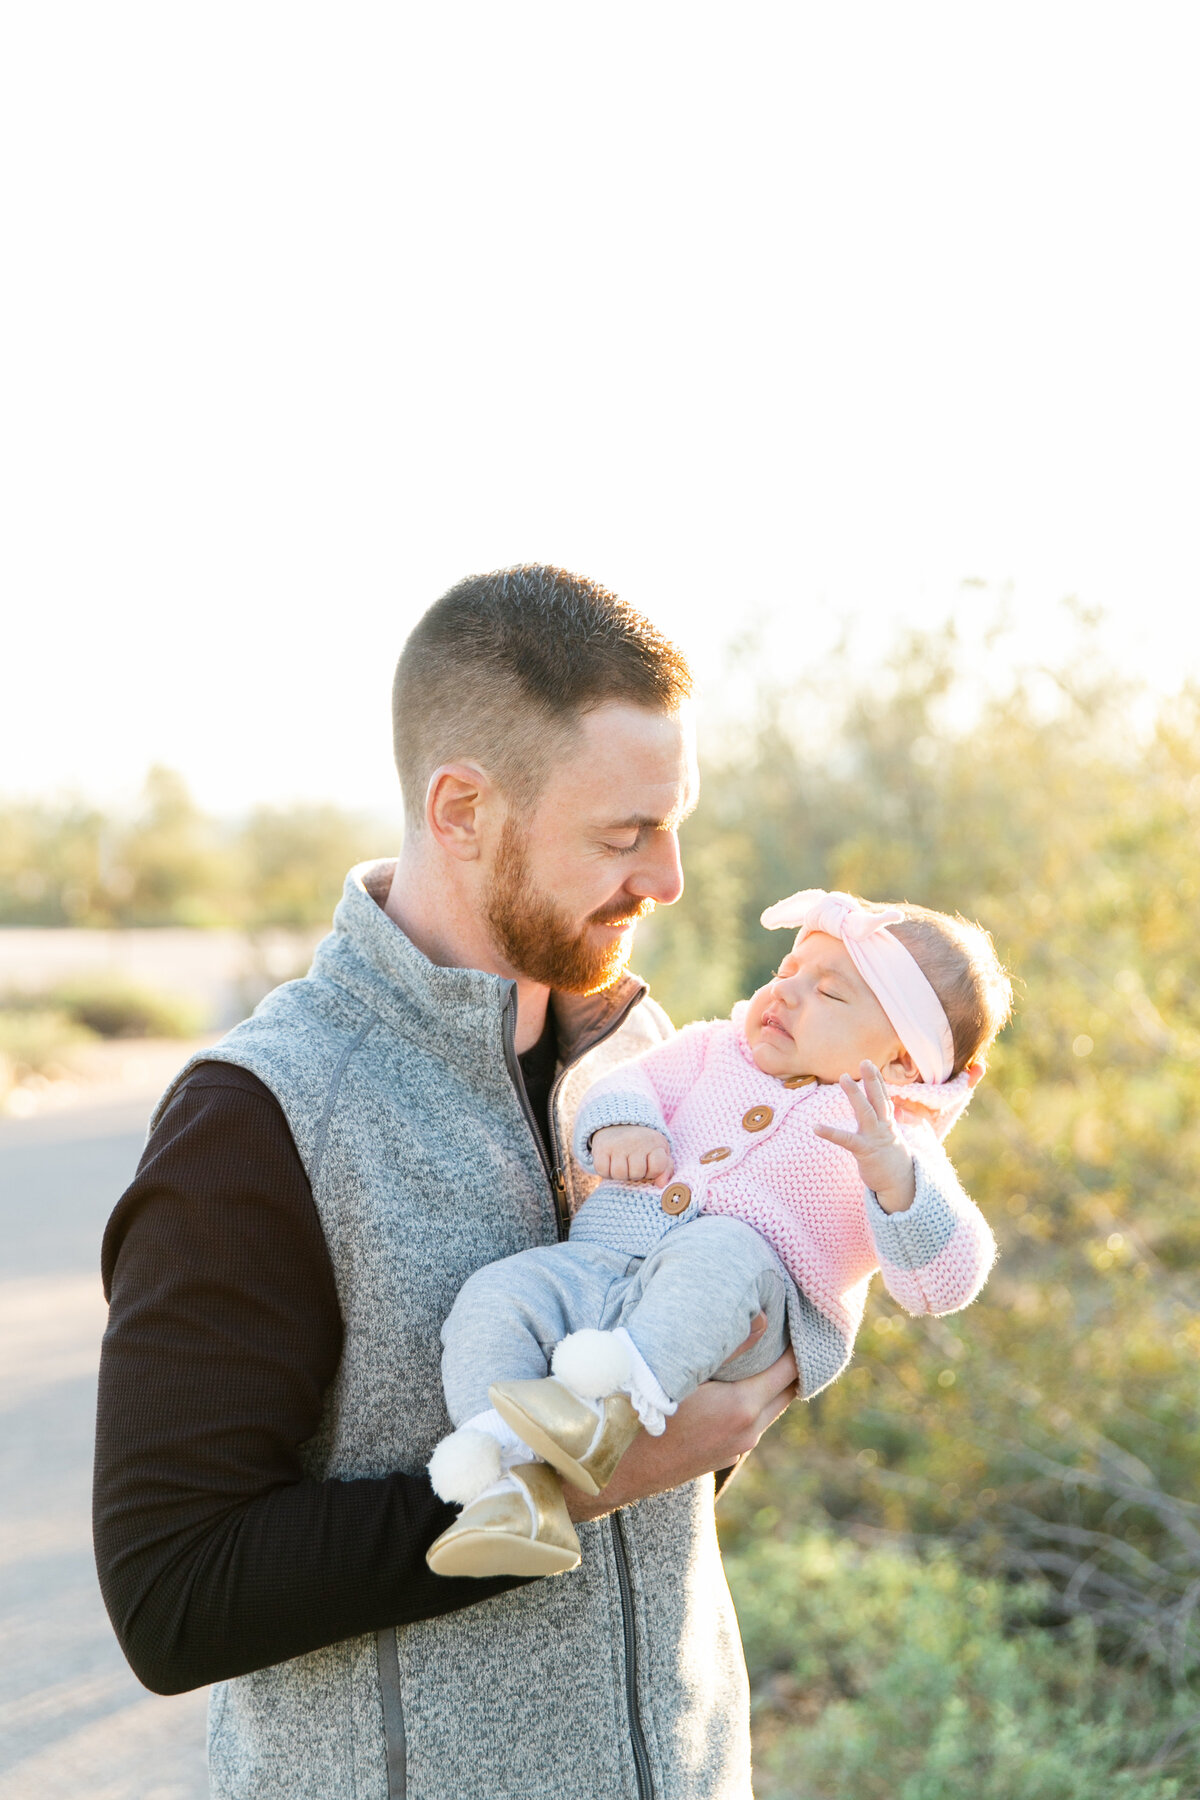 Karlie Colleen Photography - Scottsdale Family Photography - Lauren & Family-13